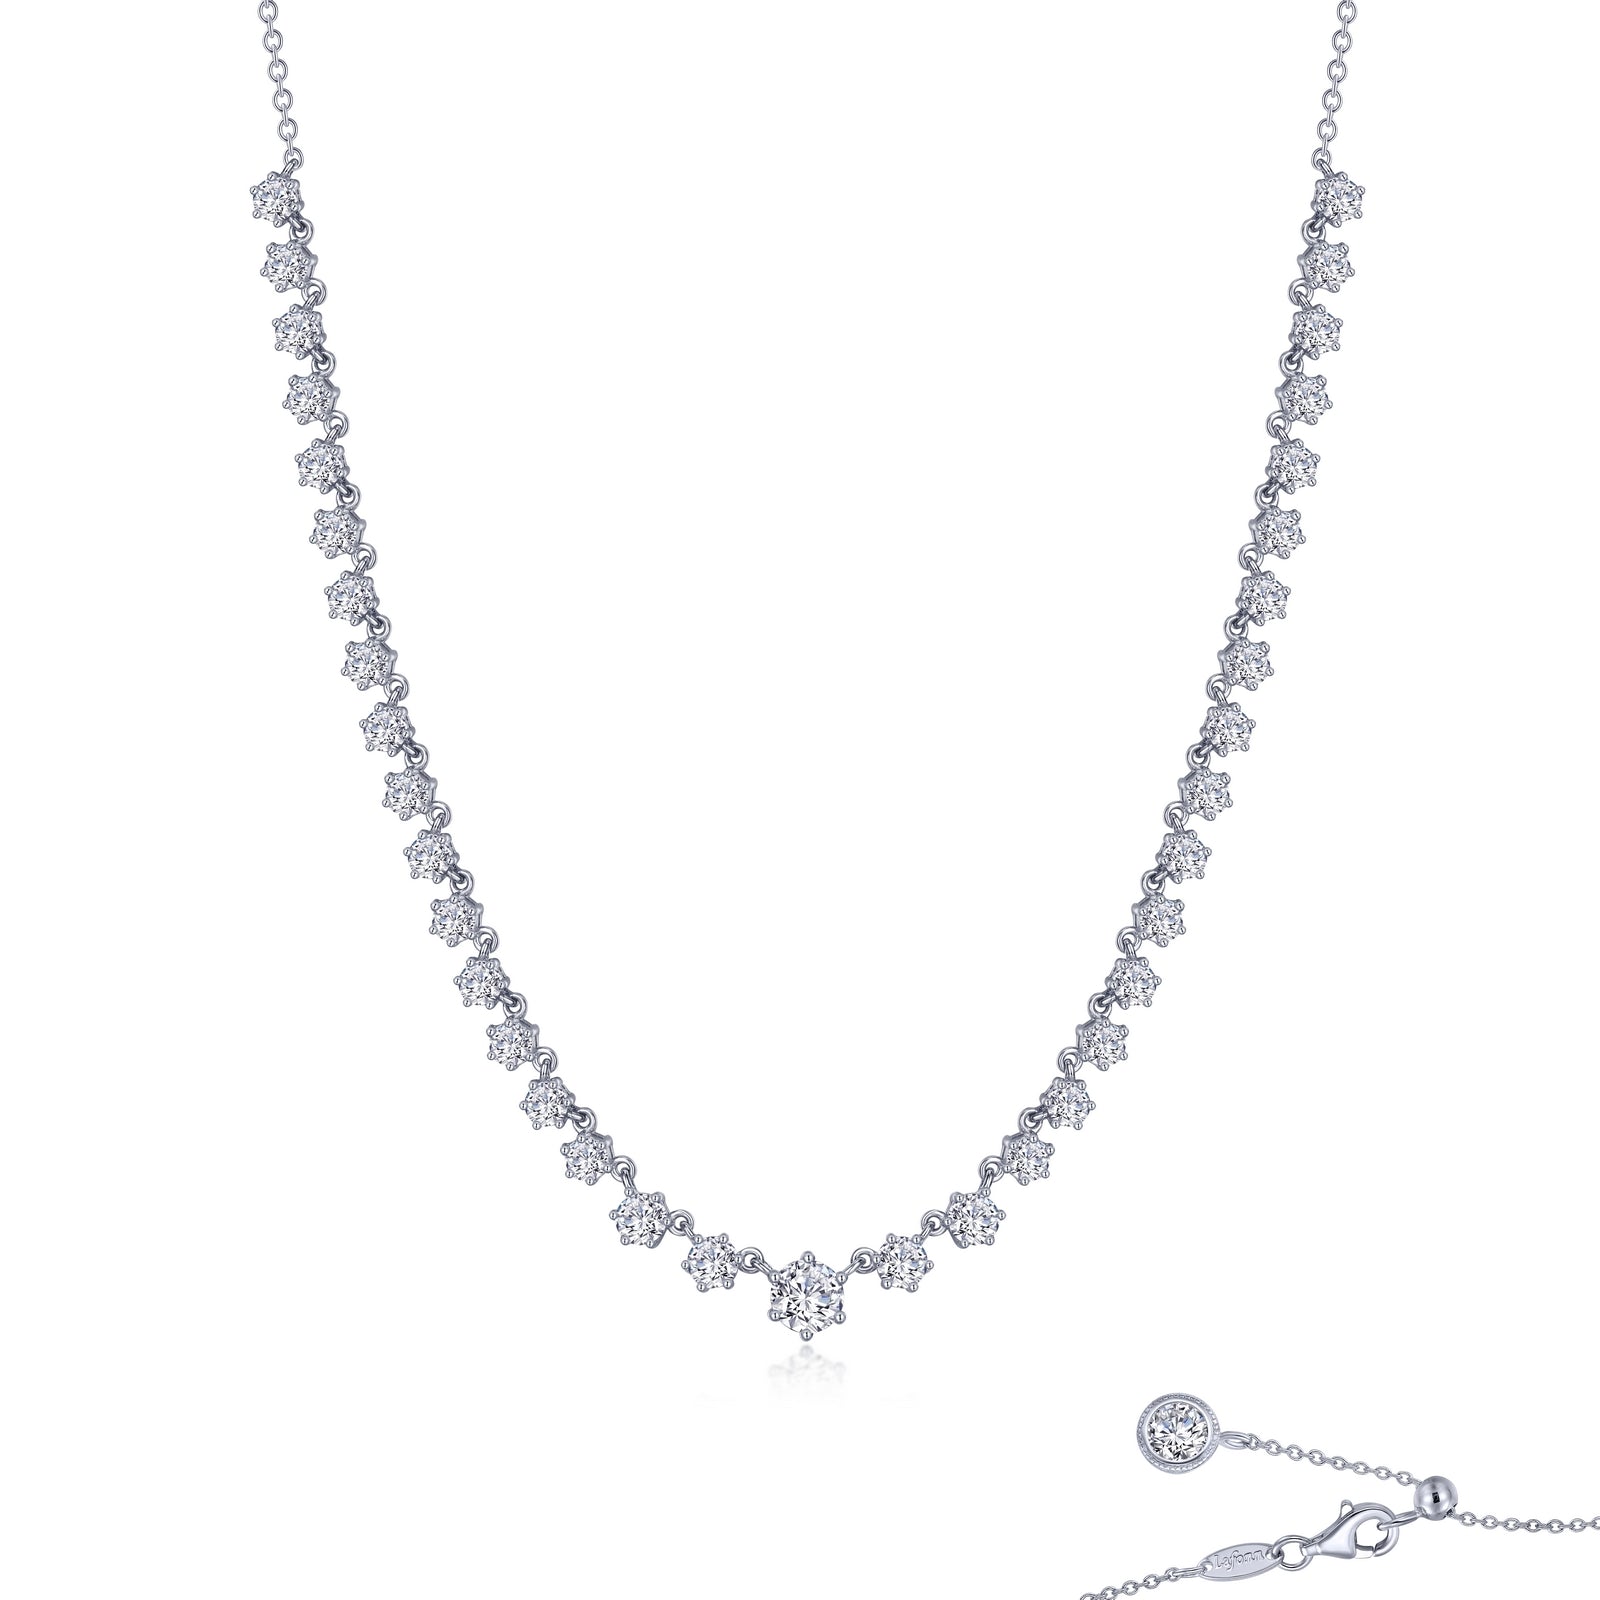 Graduated Tennis Necklace-N0272CLP